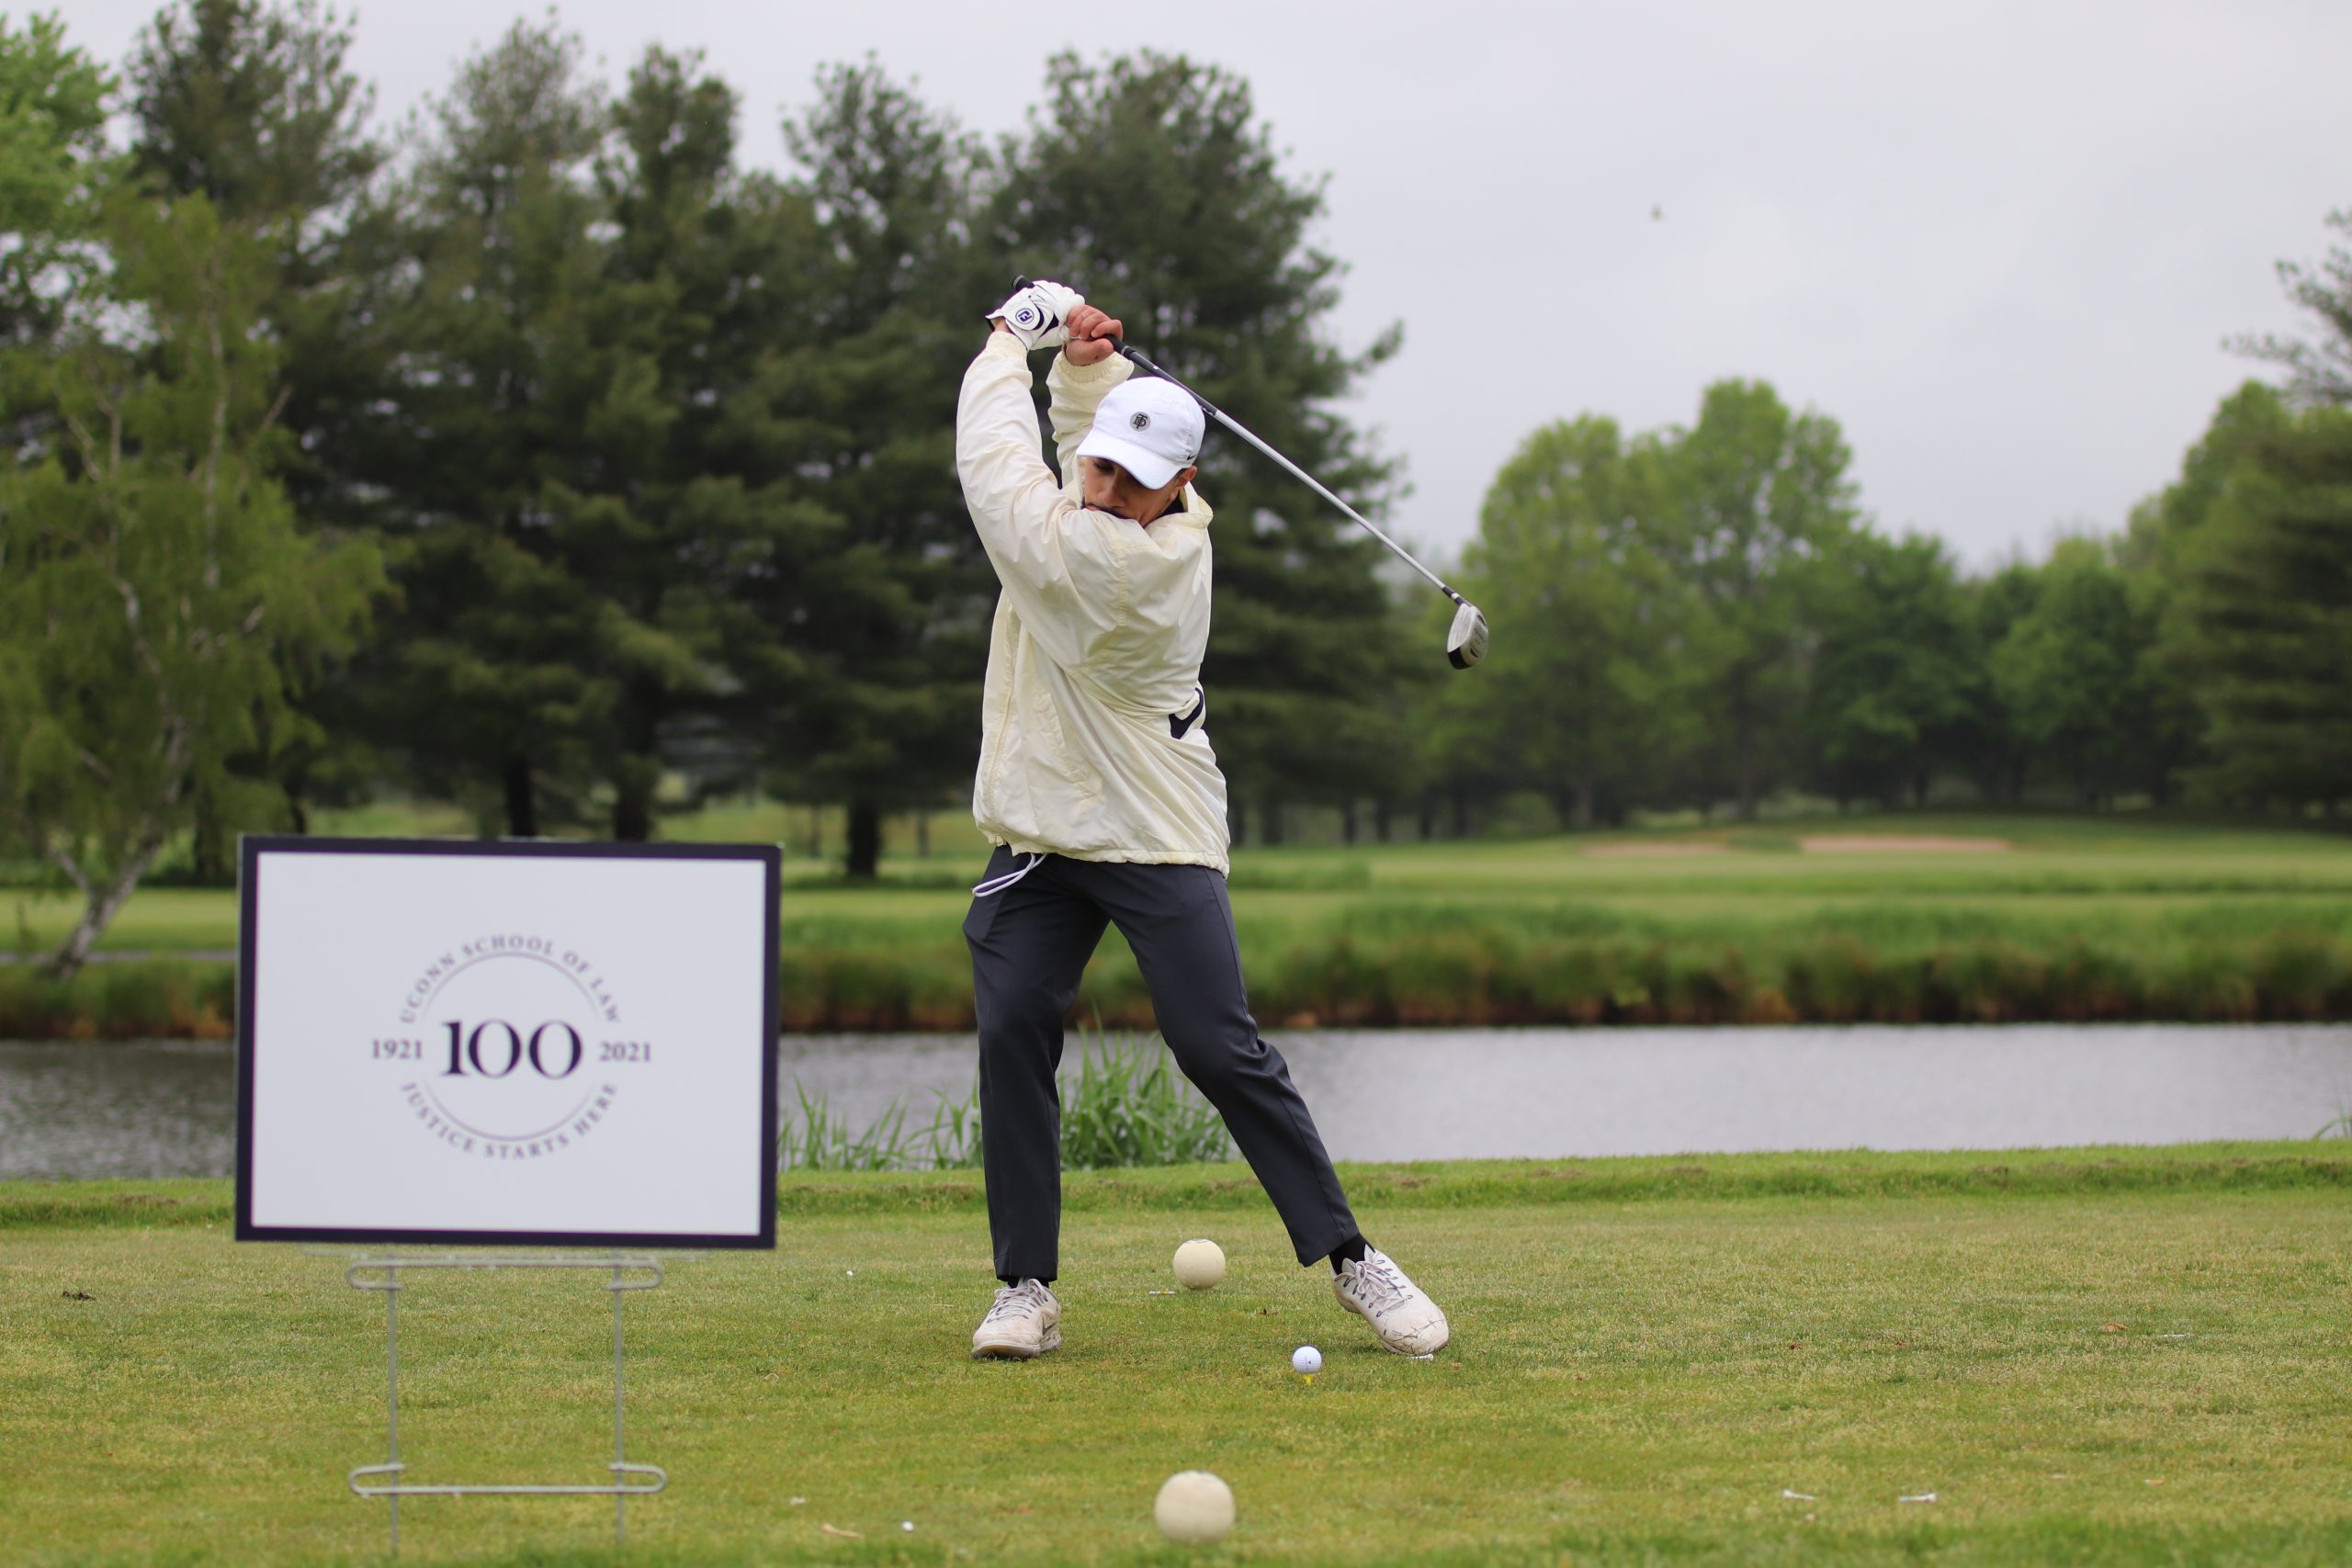 Attendee hits off the tee at the Centennial Golf Tournament